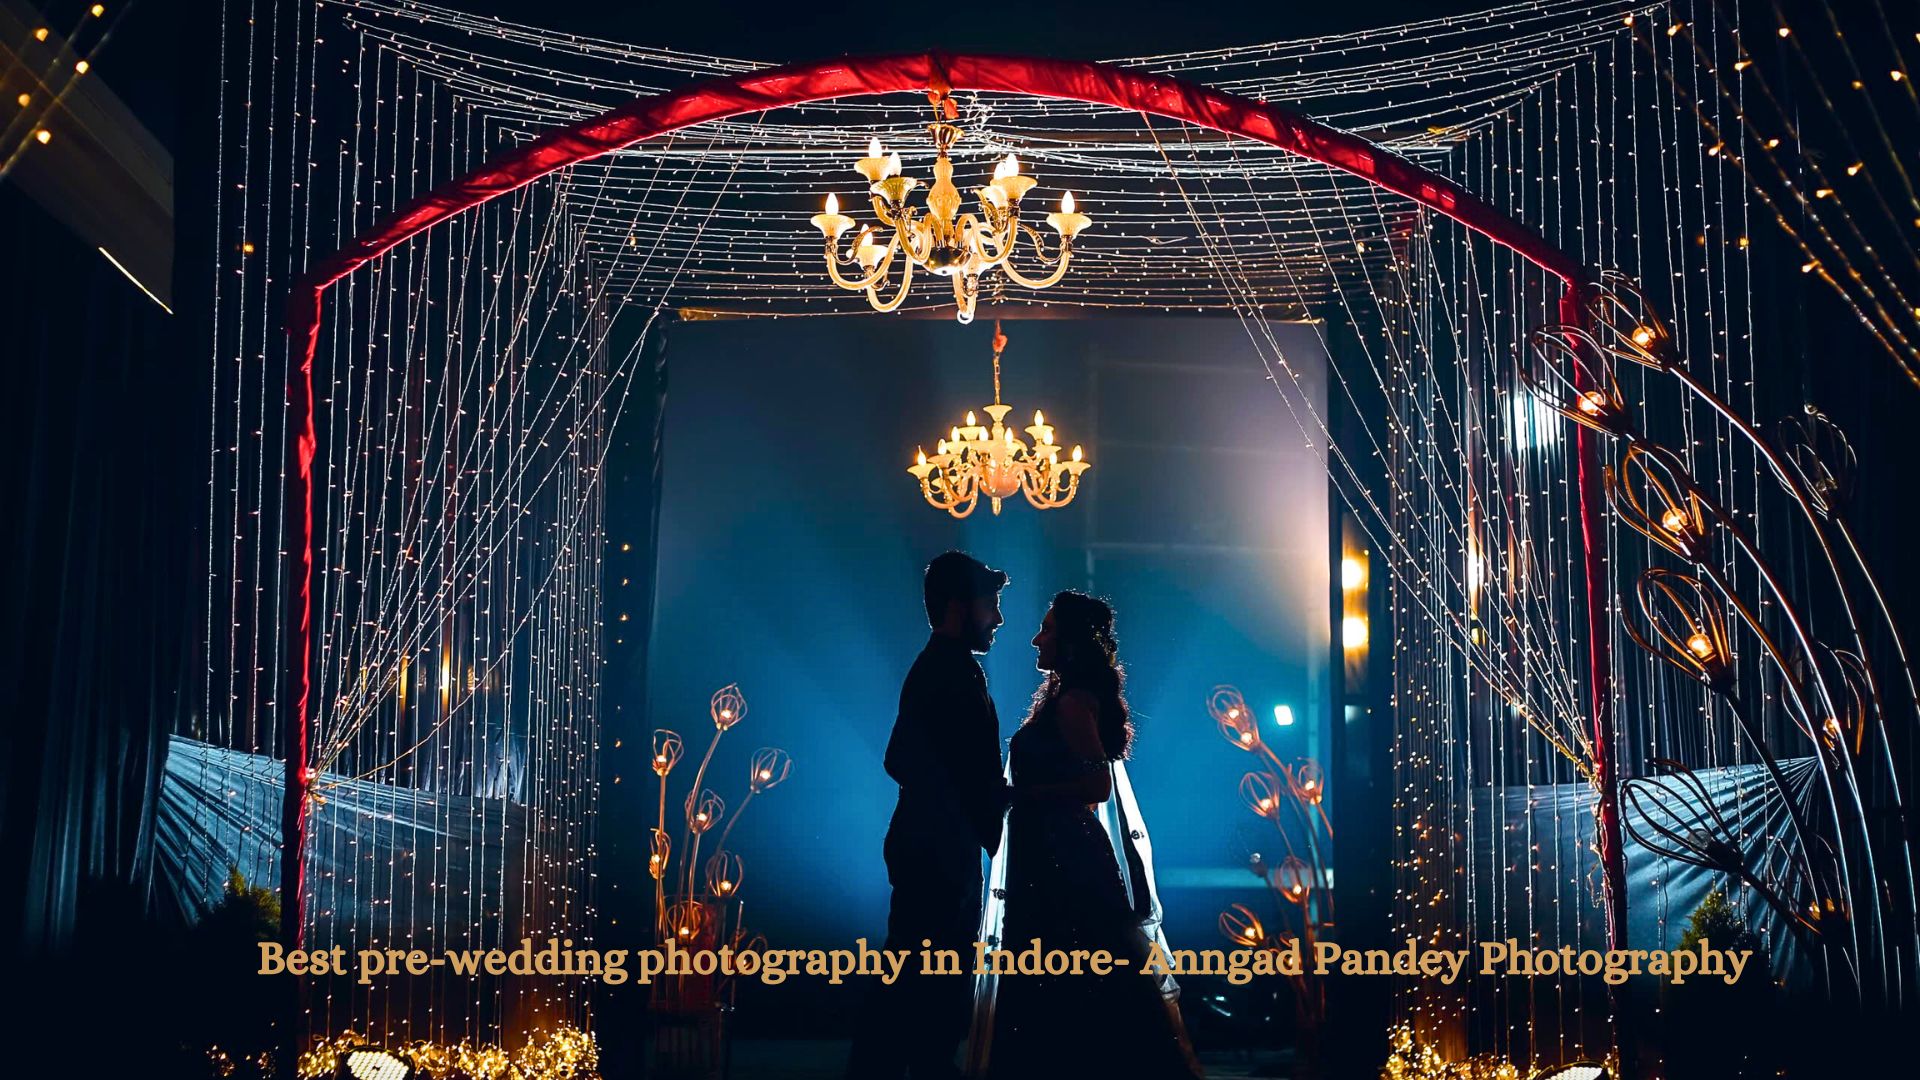 Best pre-wedding photography in Indore- Anngad Pandey Photography